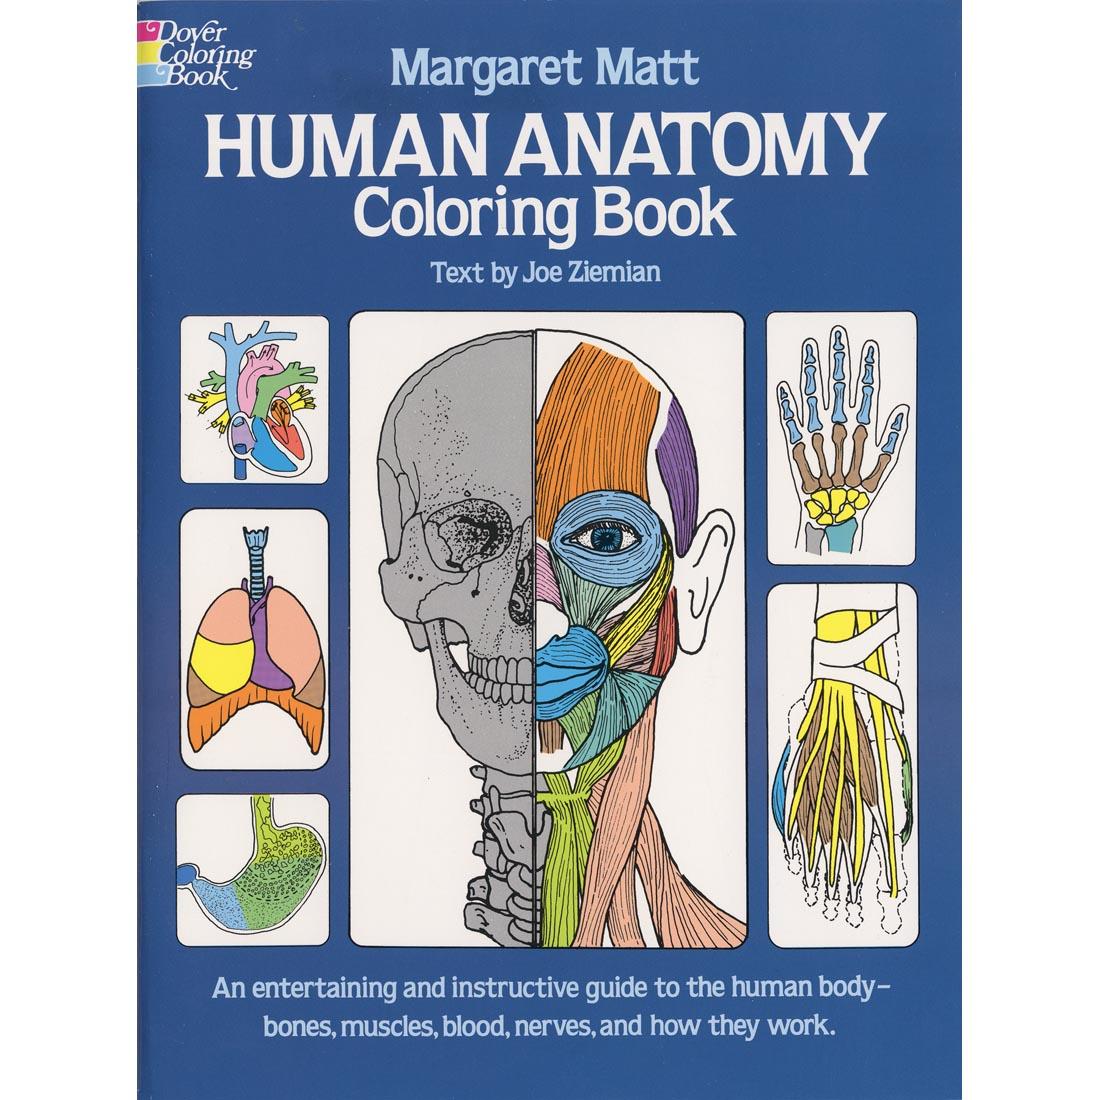 Human Anatomy Coloring Book by Dover